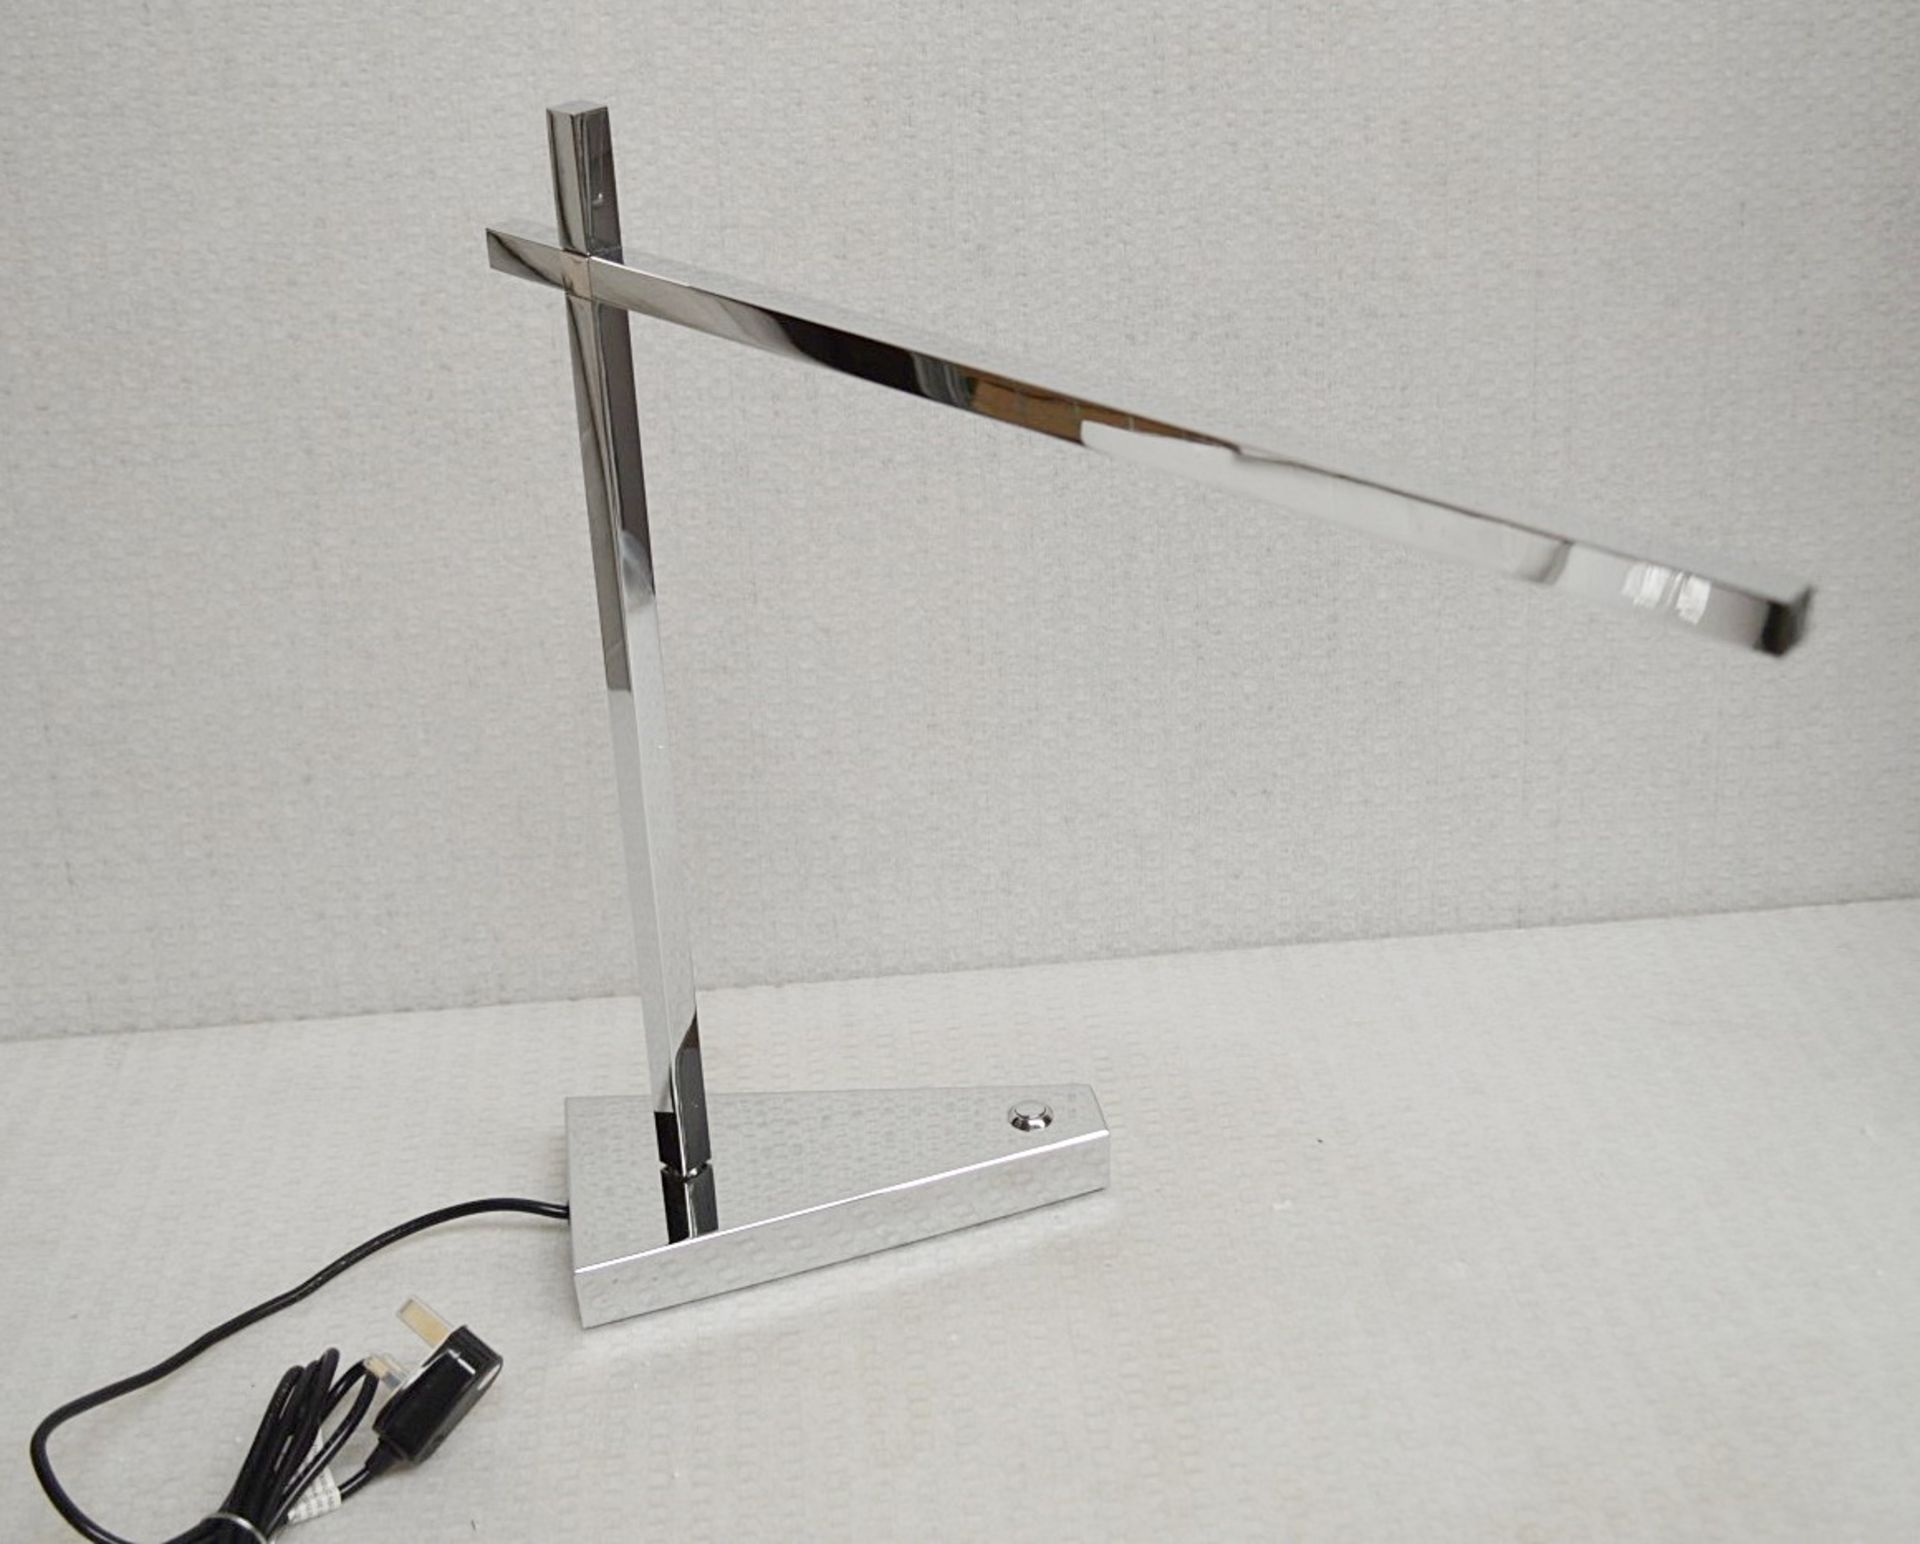 1 x CHELSOM 'Crane' Steel LED Desk Table Lamp With Directional Arm In A Chrome Finish - Unused Boxed - Image 3 of 10